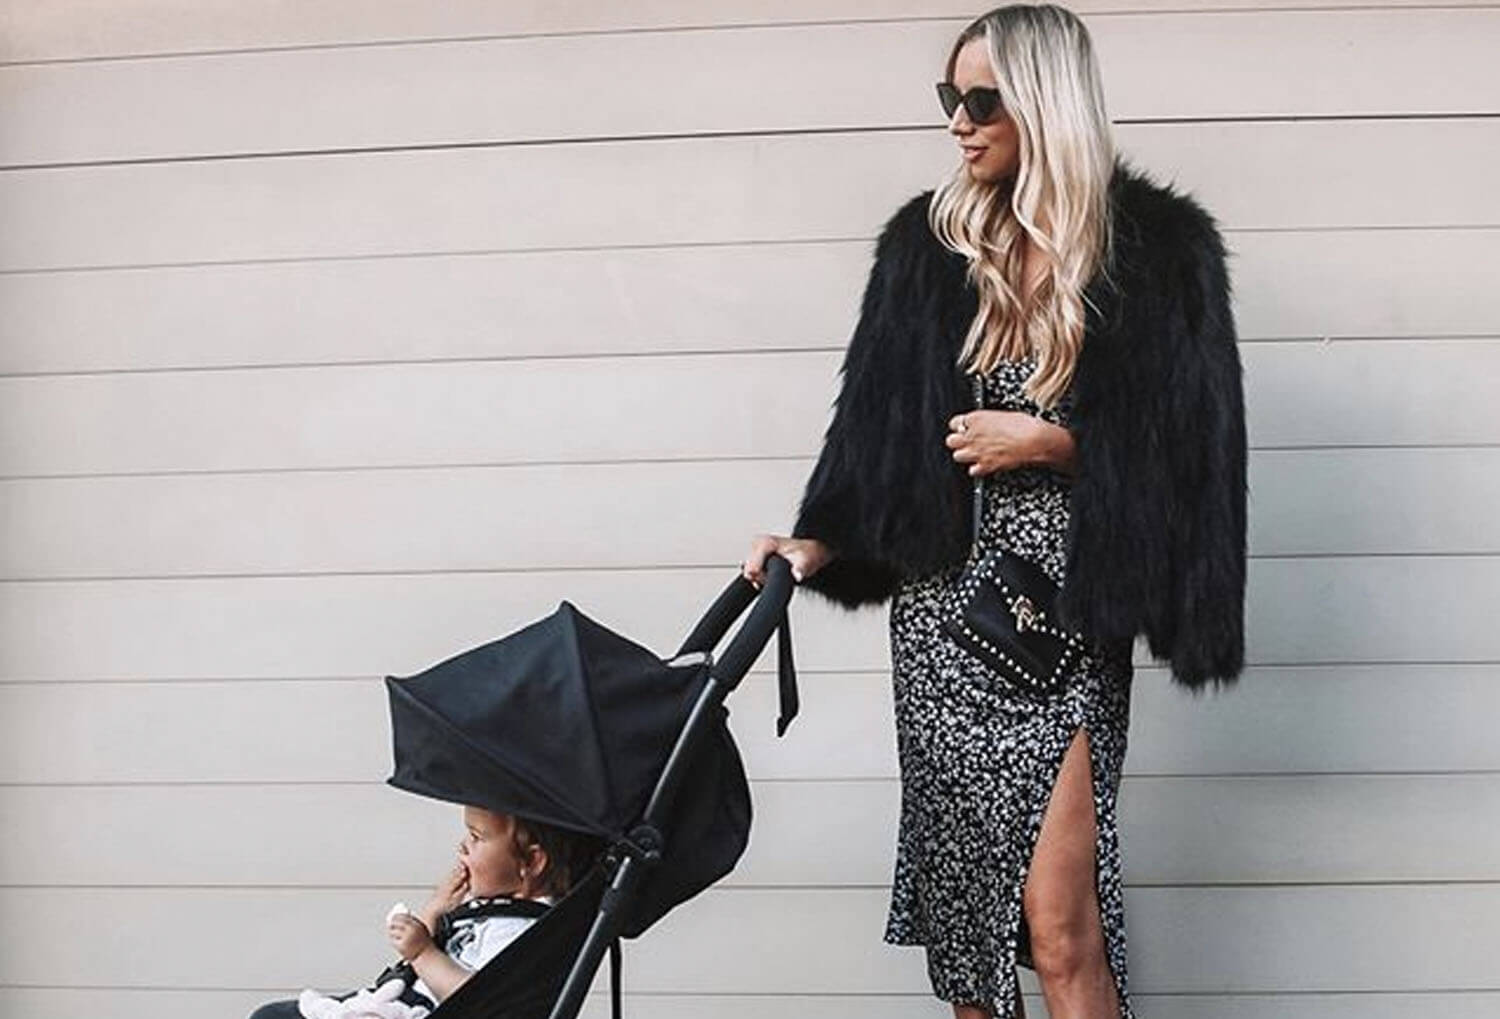 Top 5 Baby Strollers You Can Buy In Dubai